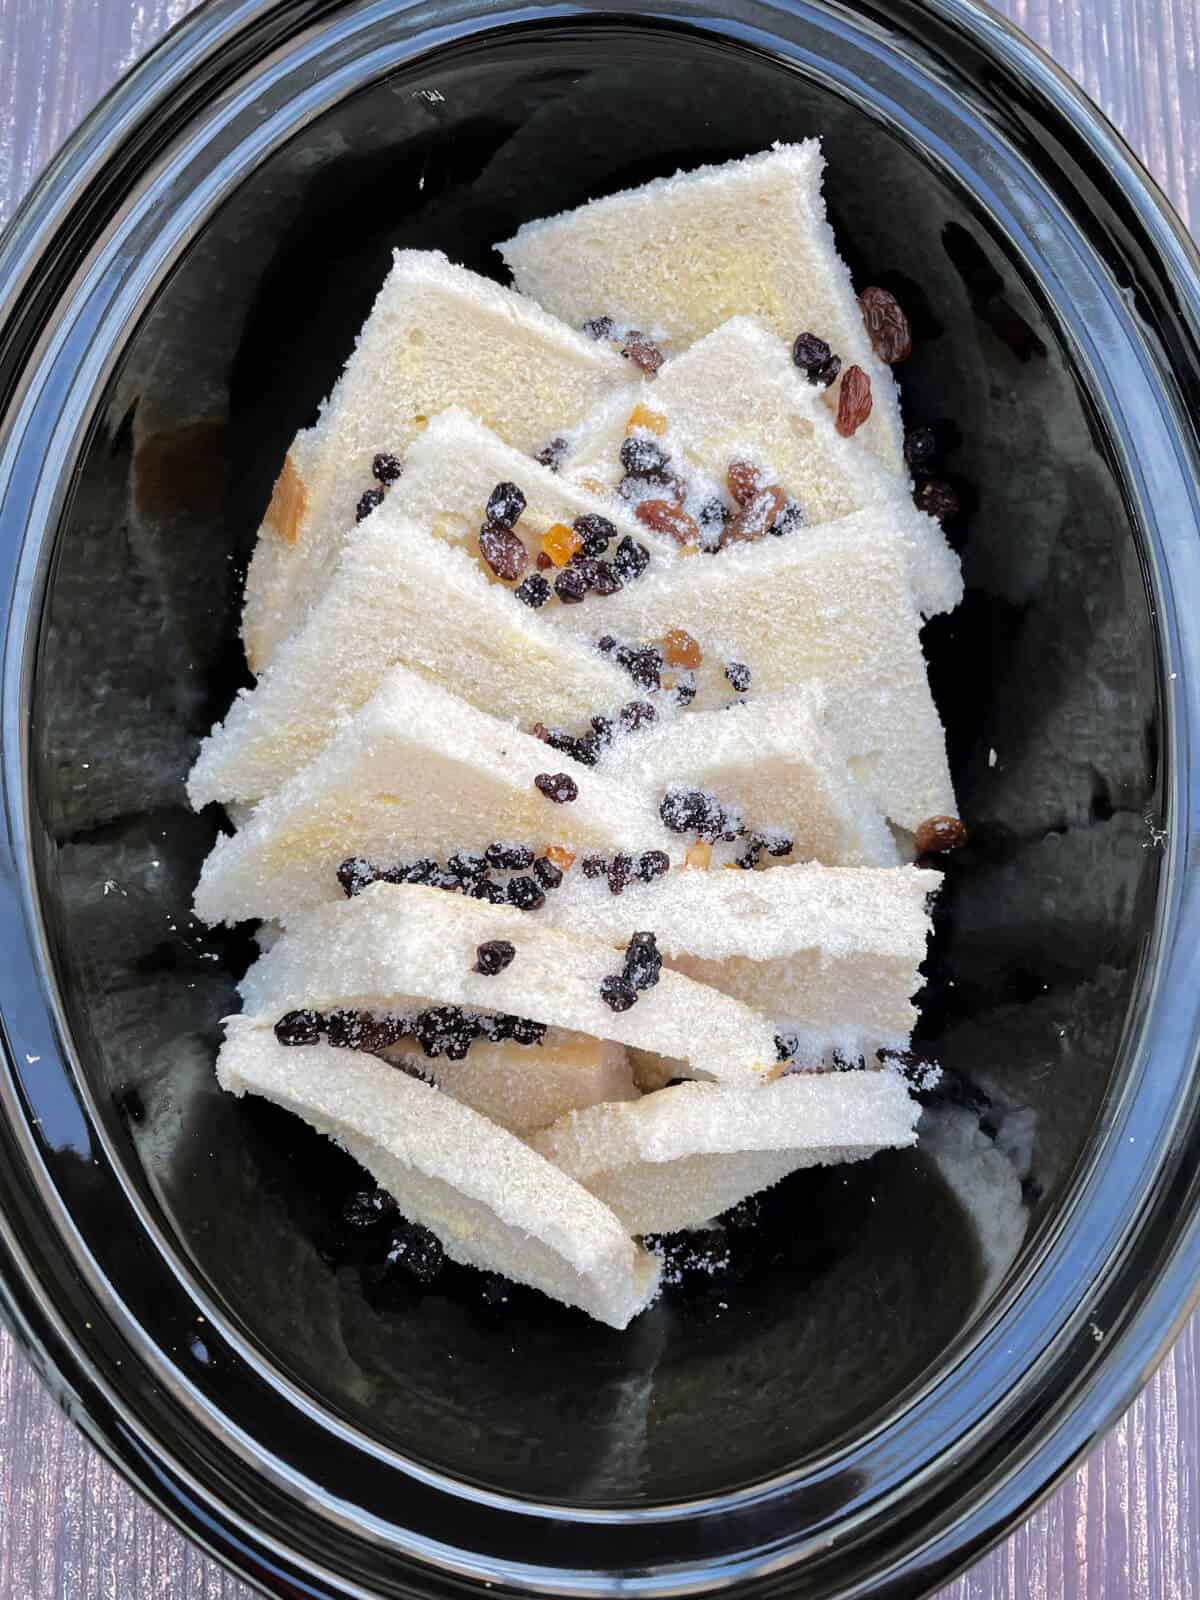 Second layer of bread and dried fruit in slow cooker pot.